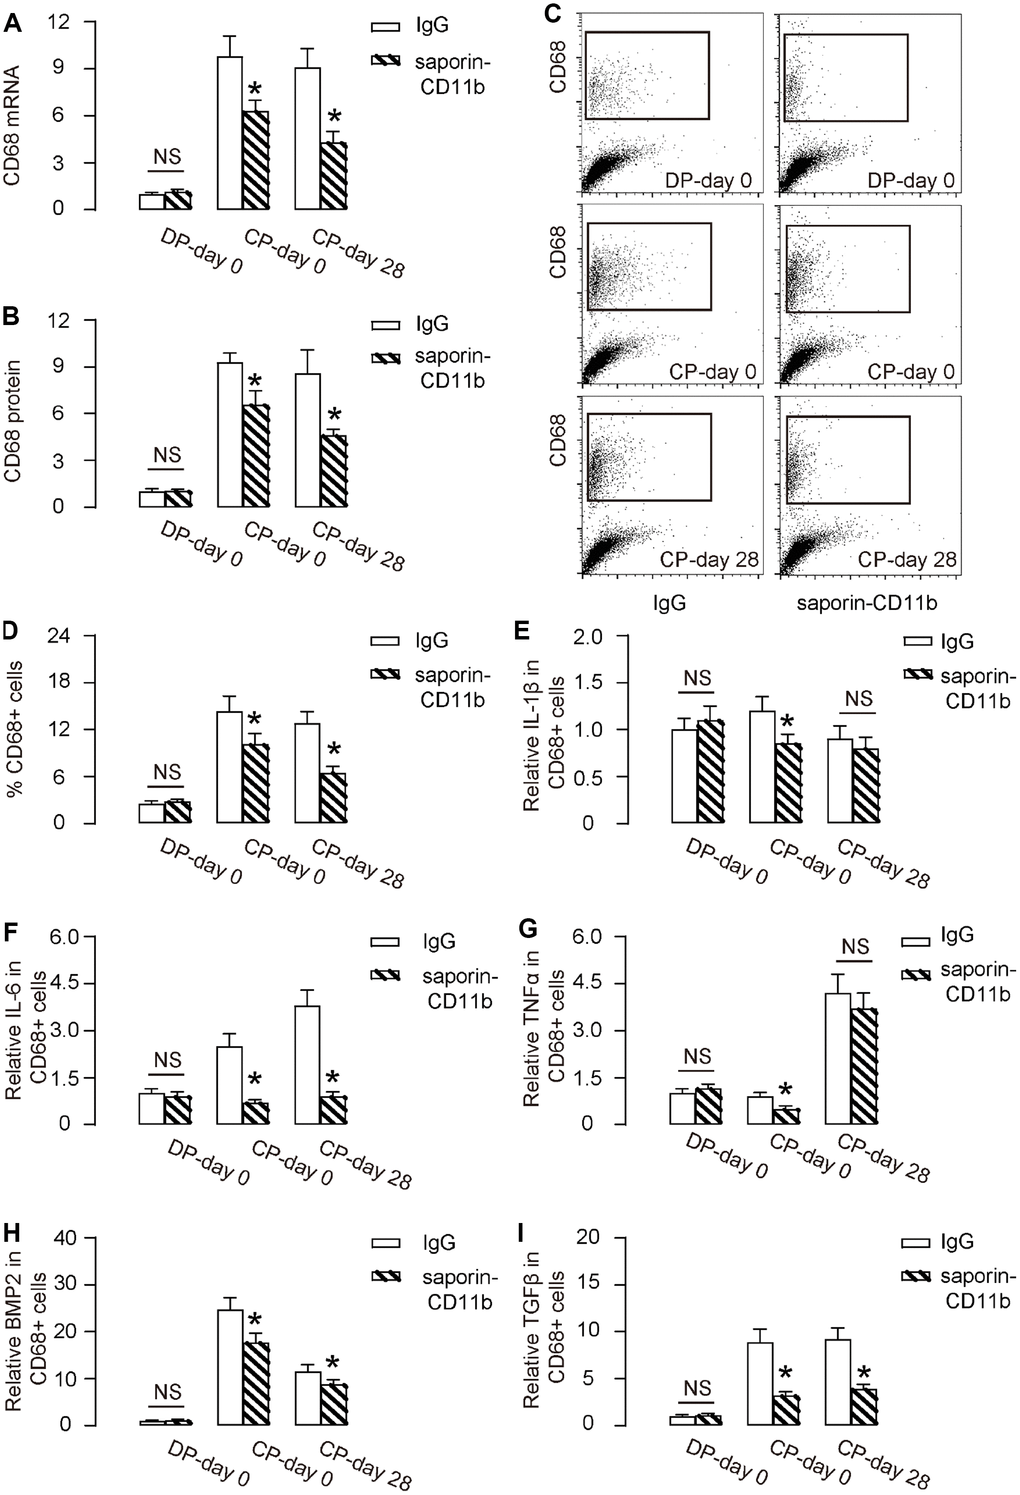 Saporin-CD11b reduces macrophages increase during DO. (A, B) RT-qPCR for CD68 mRNA (A) and ELISA for CD68 protein (B) in regenerating bone tissue from saporin-CD11b-treated mice or control IgG-treated mice. (C, D) FACS for CD68+ cells in regenerating bone tissue saporin-CD11b-treated mice or control IgG-treated mice by representative flow charts (C), and by quantification (D). (E–I) ELISA for IL-1β (E), IL-6 (F), TNFα (G), BMP2 (H) and TGFβ (I) from FAC-sorted CD68+ macrophages. DP-day 0: day 0 of distraction phase, CP-day 0: day 0 of consolidation phase, CP-day 28: day 28 or consolidation phase. *p